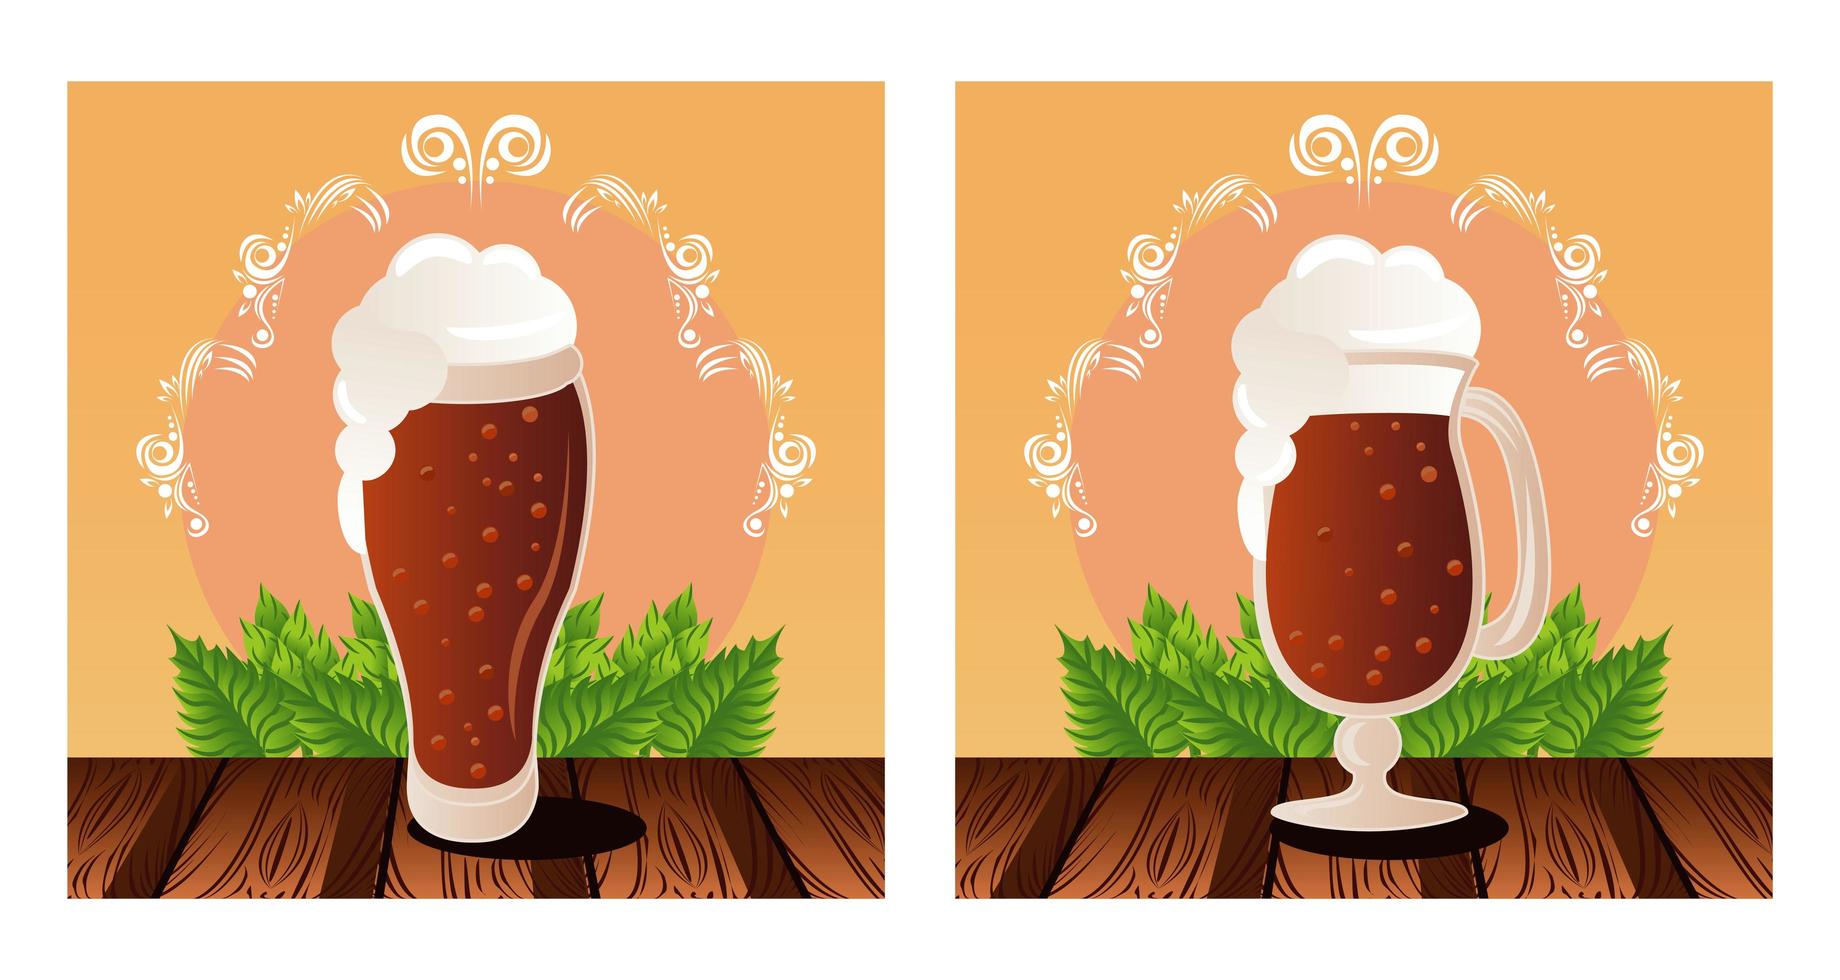 oktoberfest celebration festival poster with beers cups vector